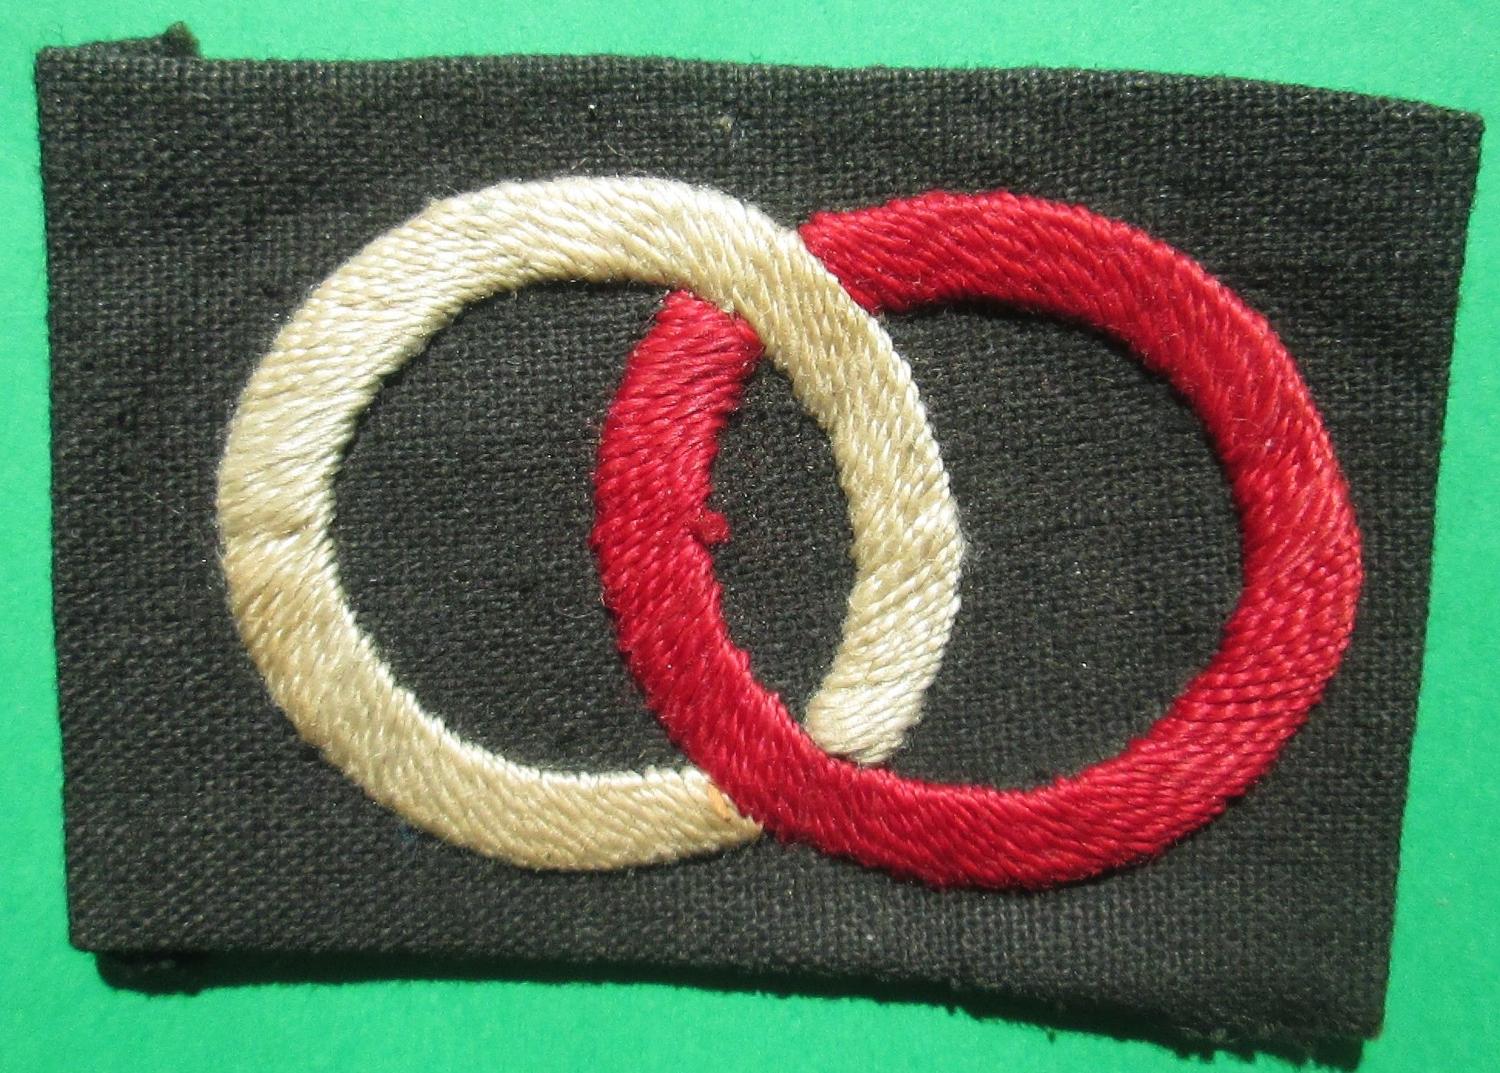 A 36th INDIAN DIVISION FORMATION PATCH